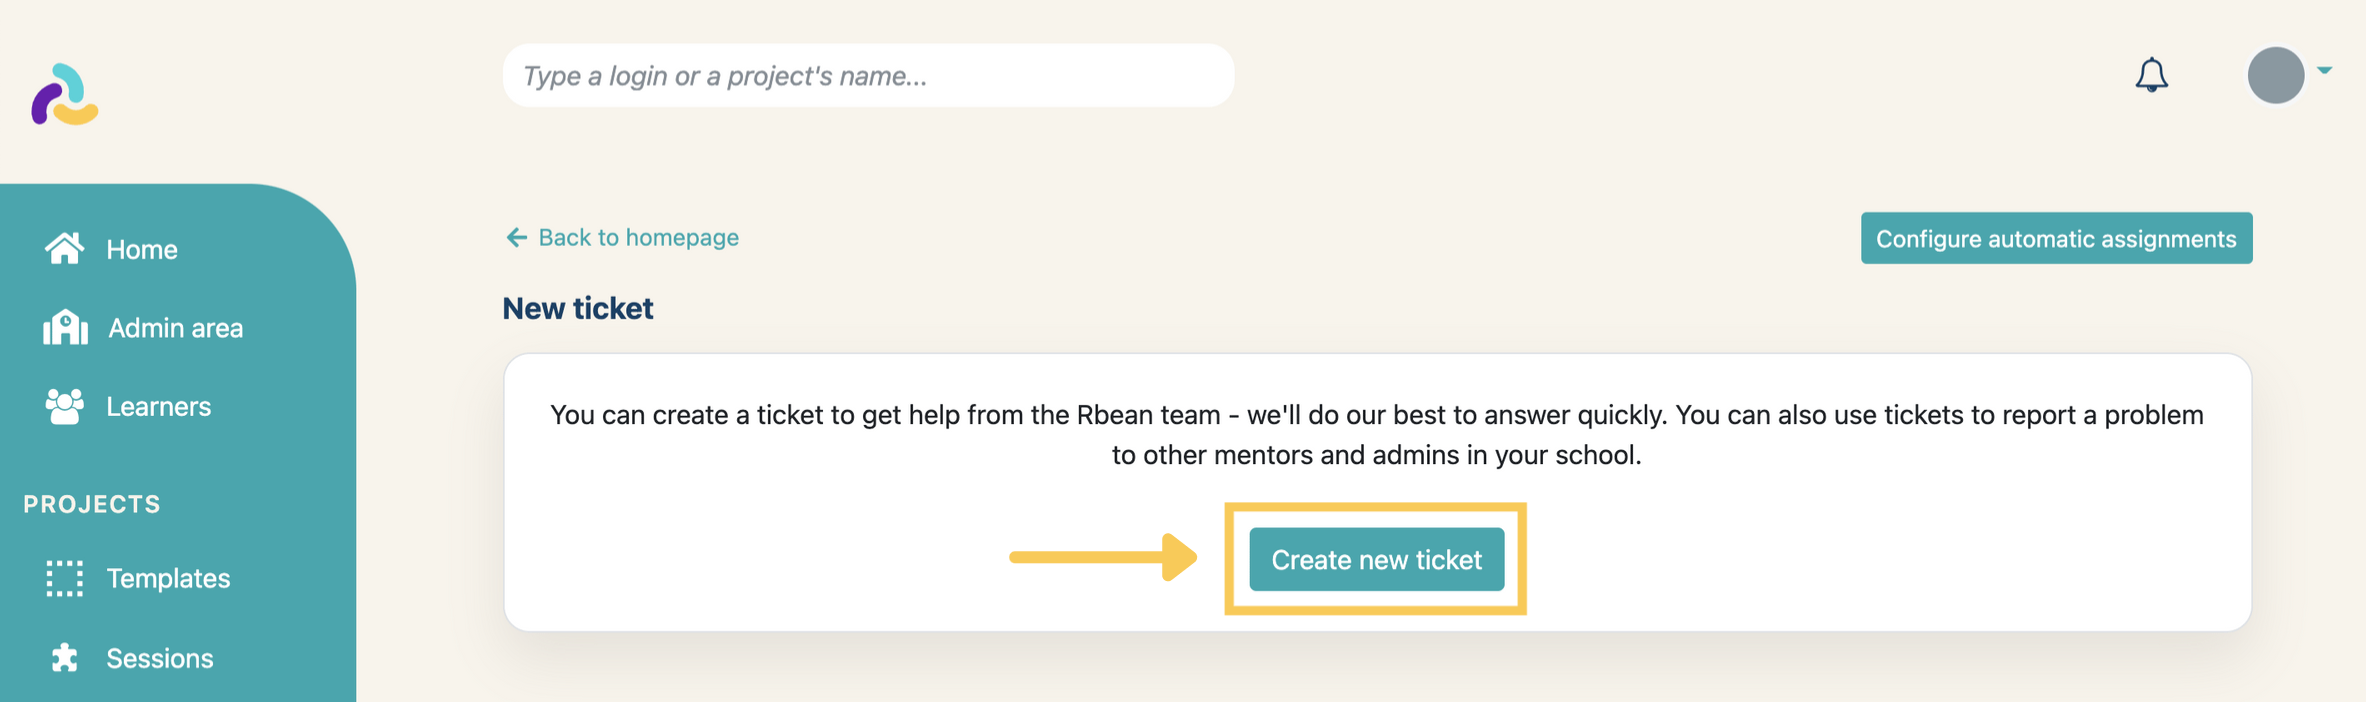 Support create new ticket button